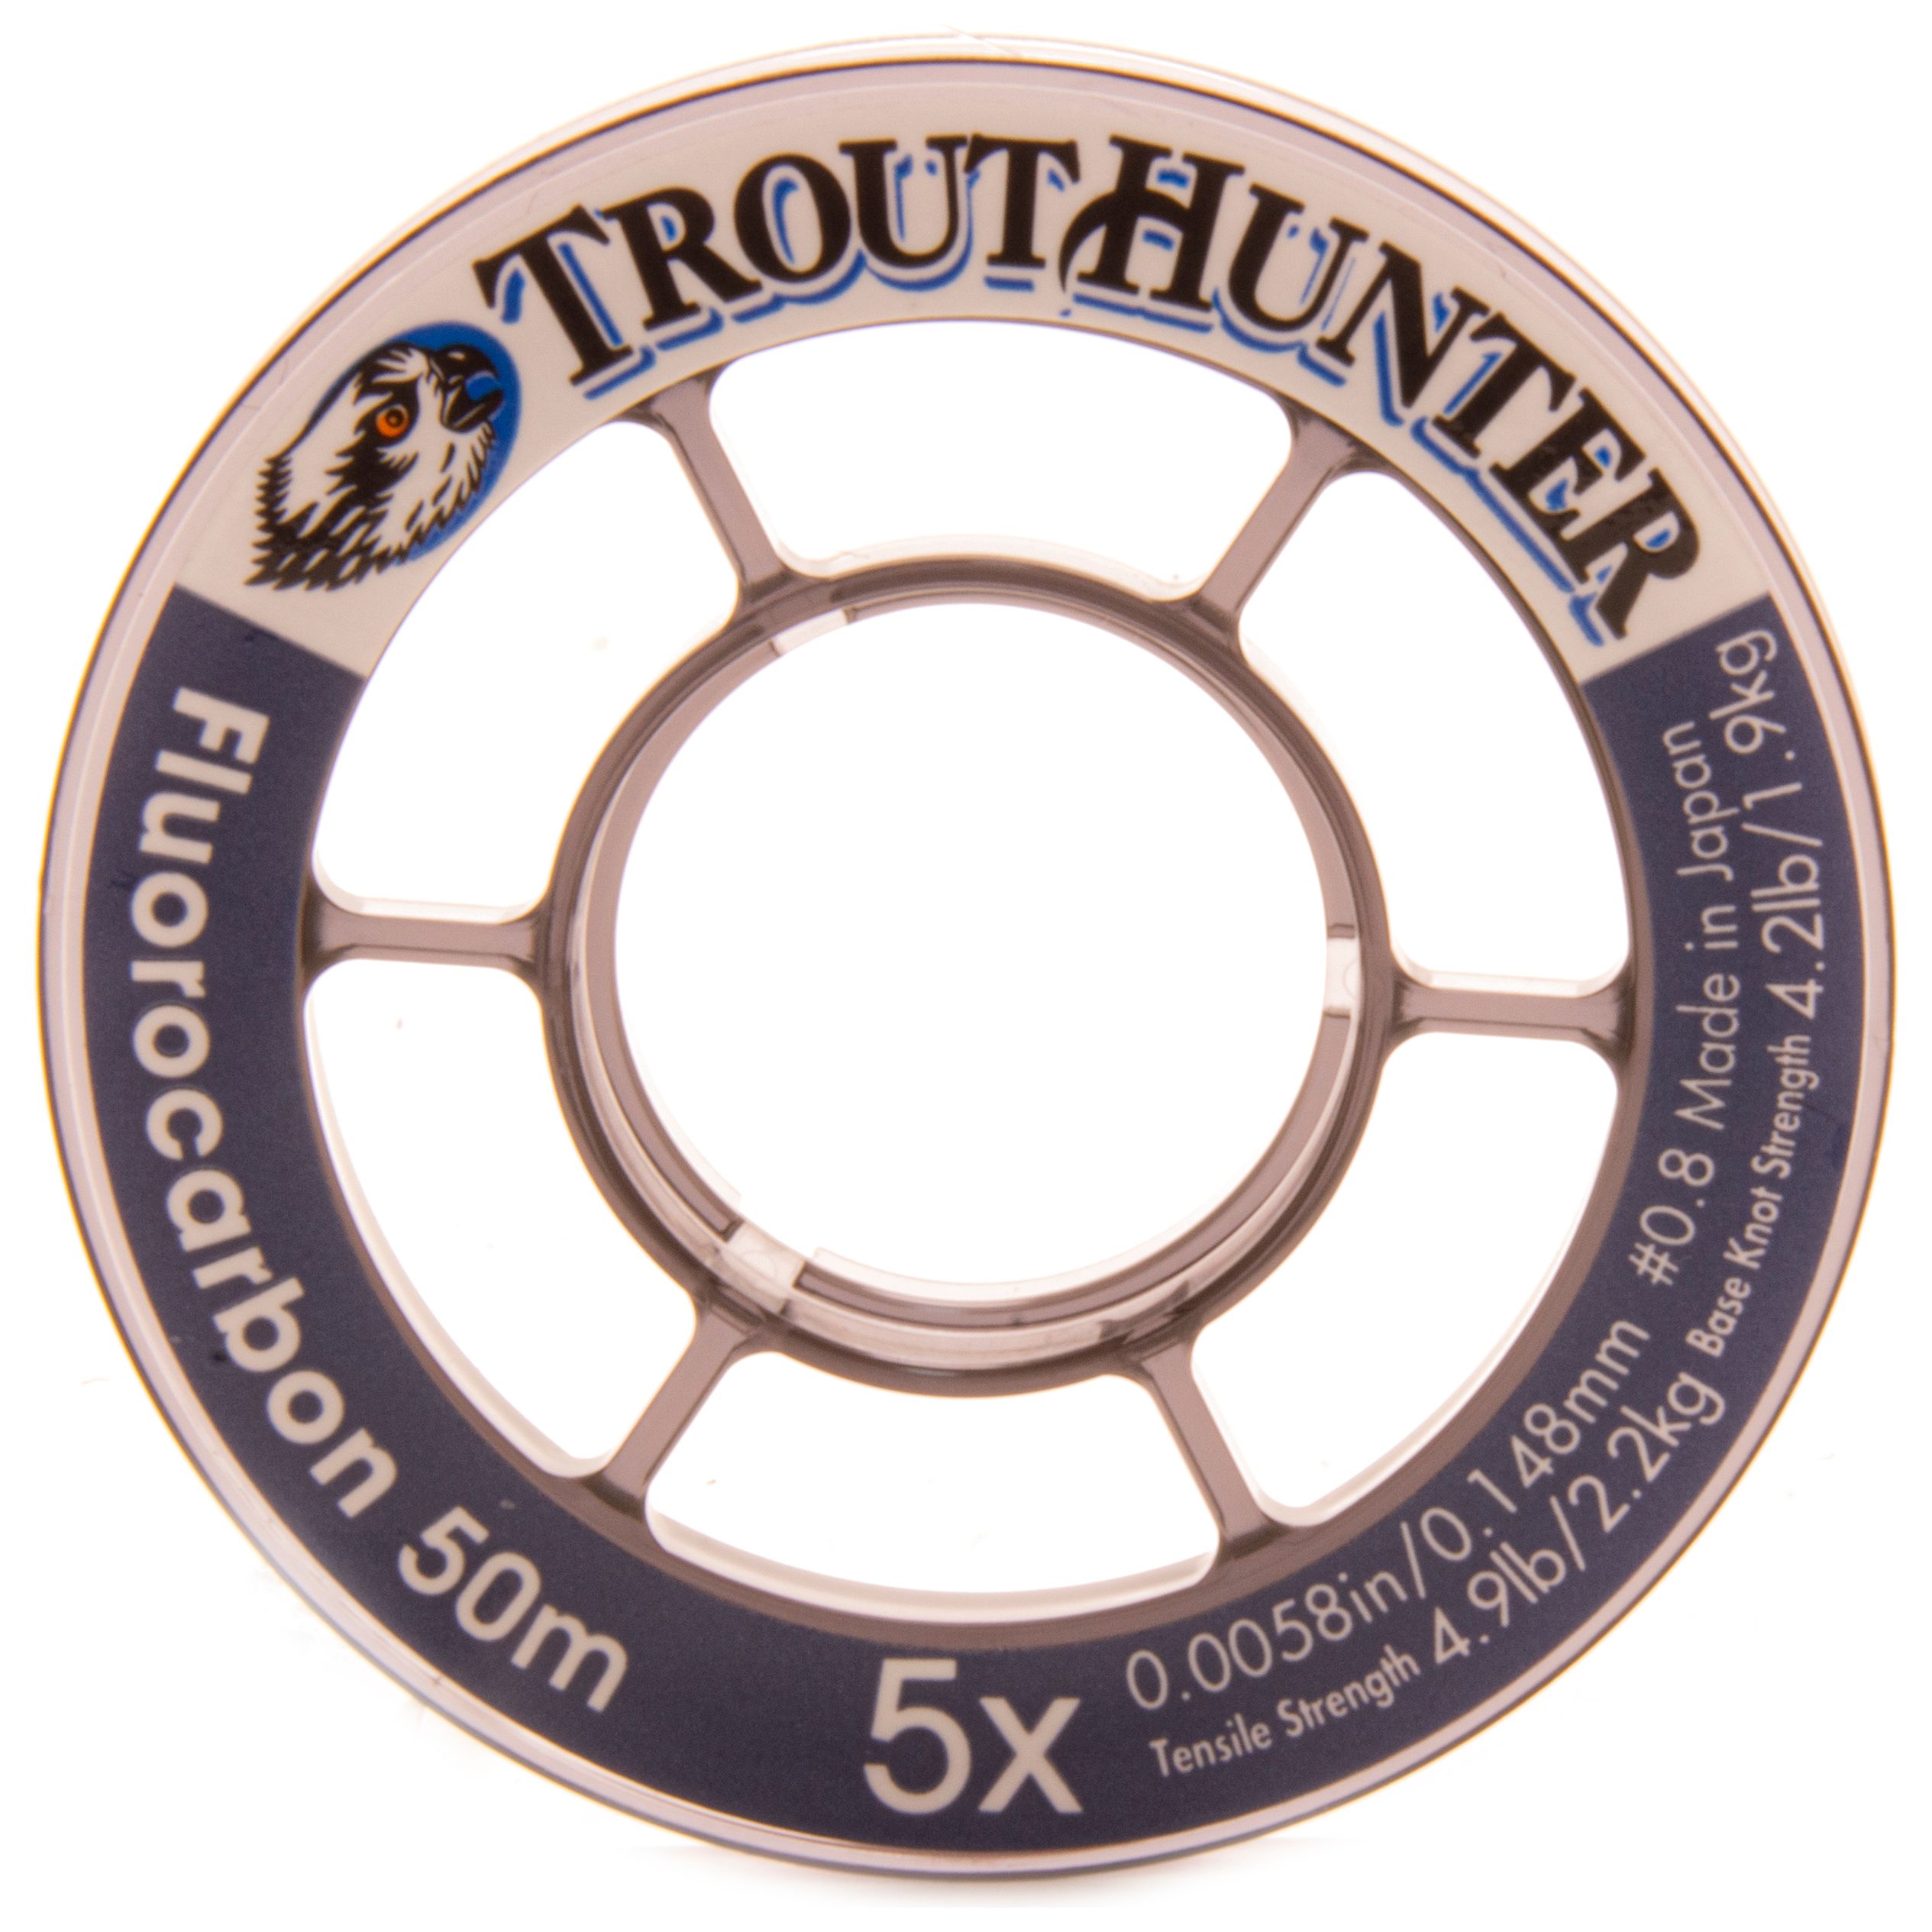 TroutHunter Fluorocarbon Tippet - Hunter Banks Fly Fishing